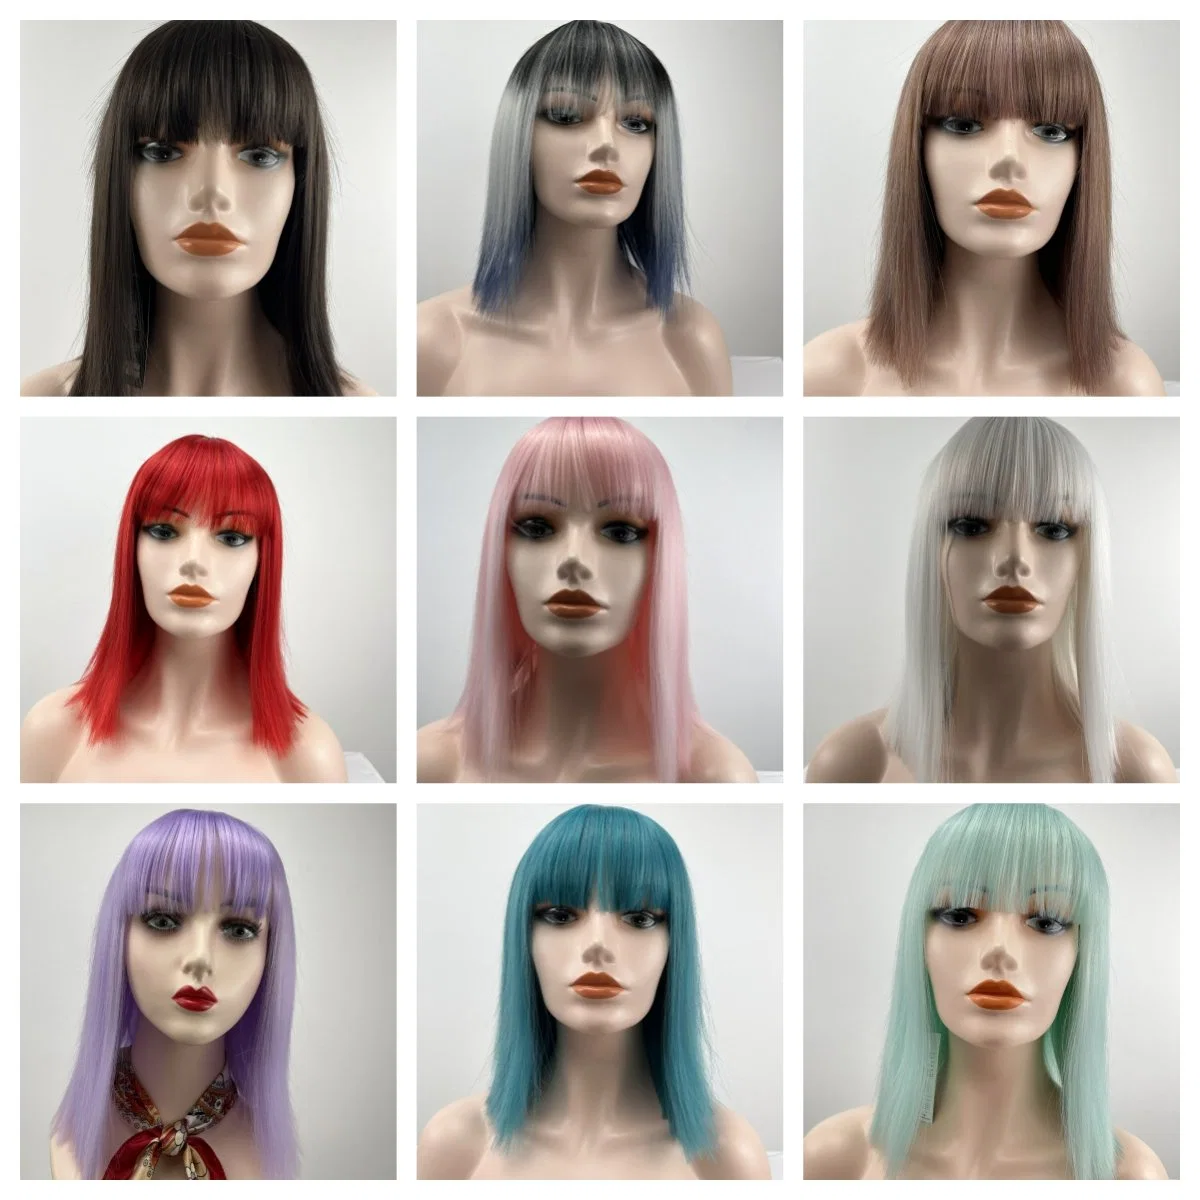 Wholesale/Supplier Party Synthetic Wigs Lolita Cosplay Pink Straight Hair Short Bob Wig Sheath with Bangs